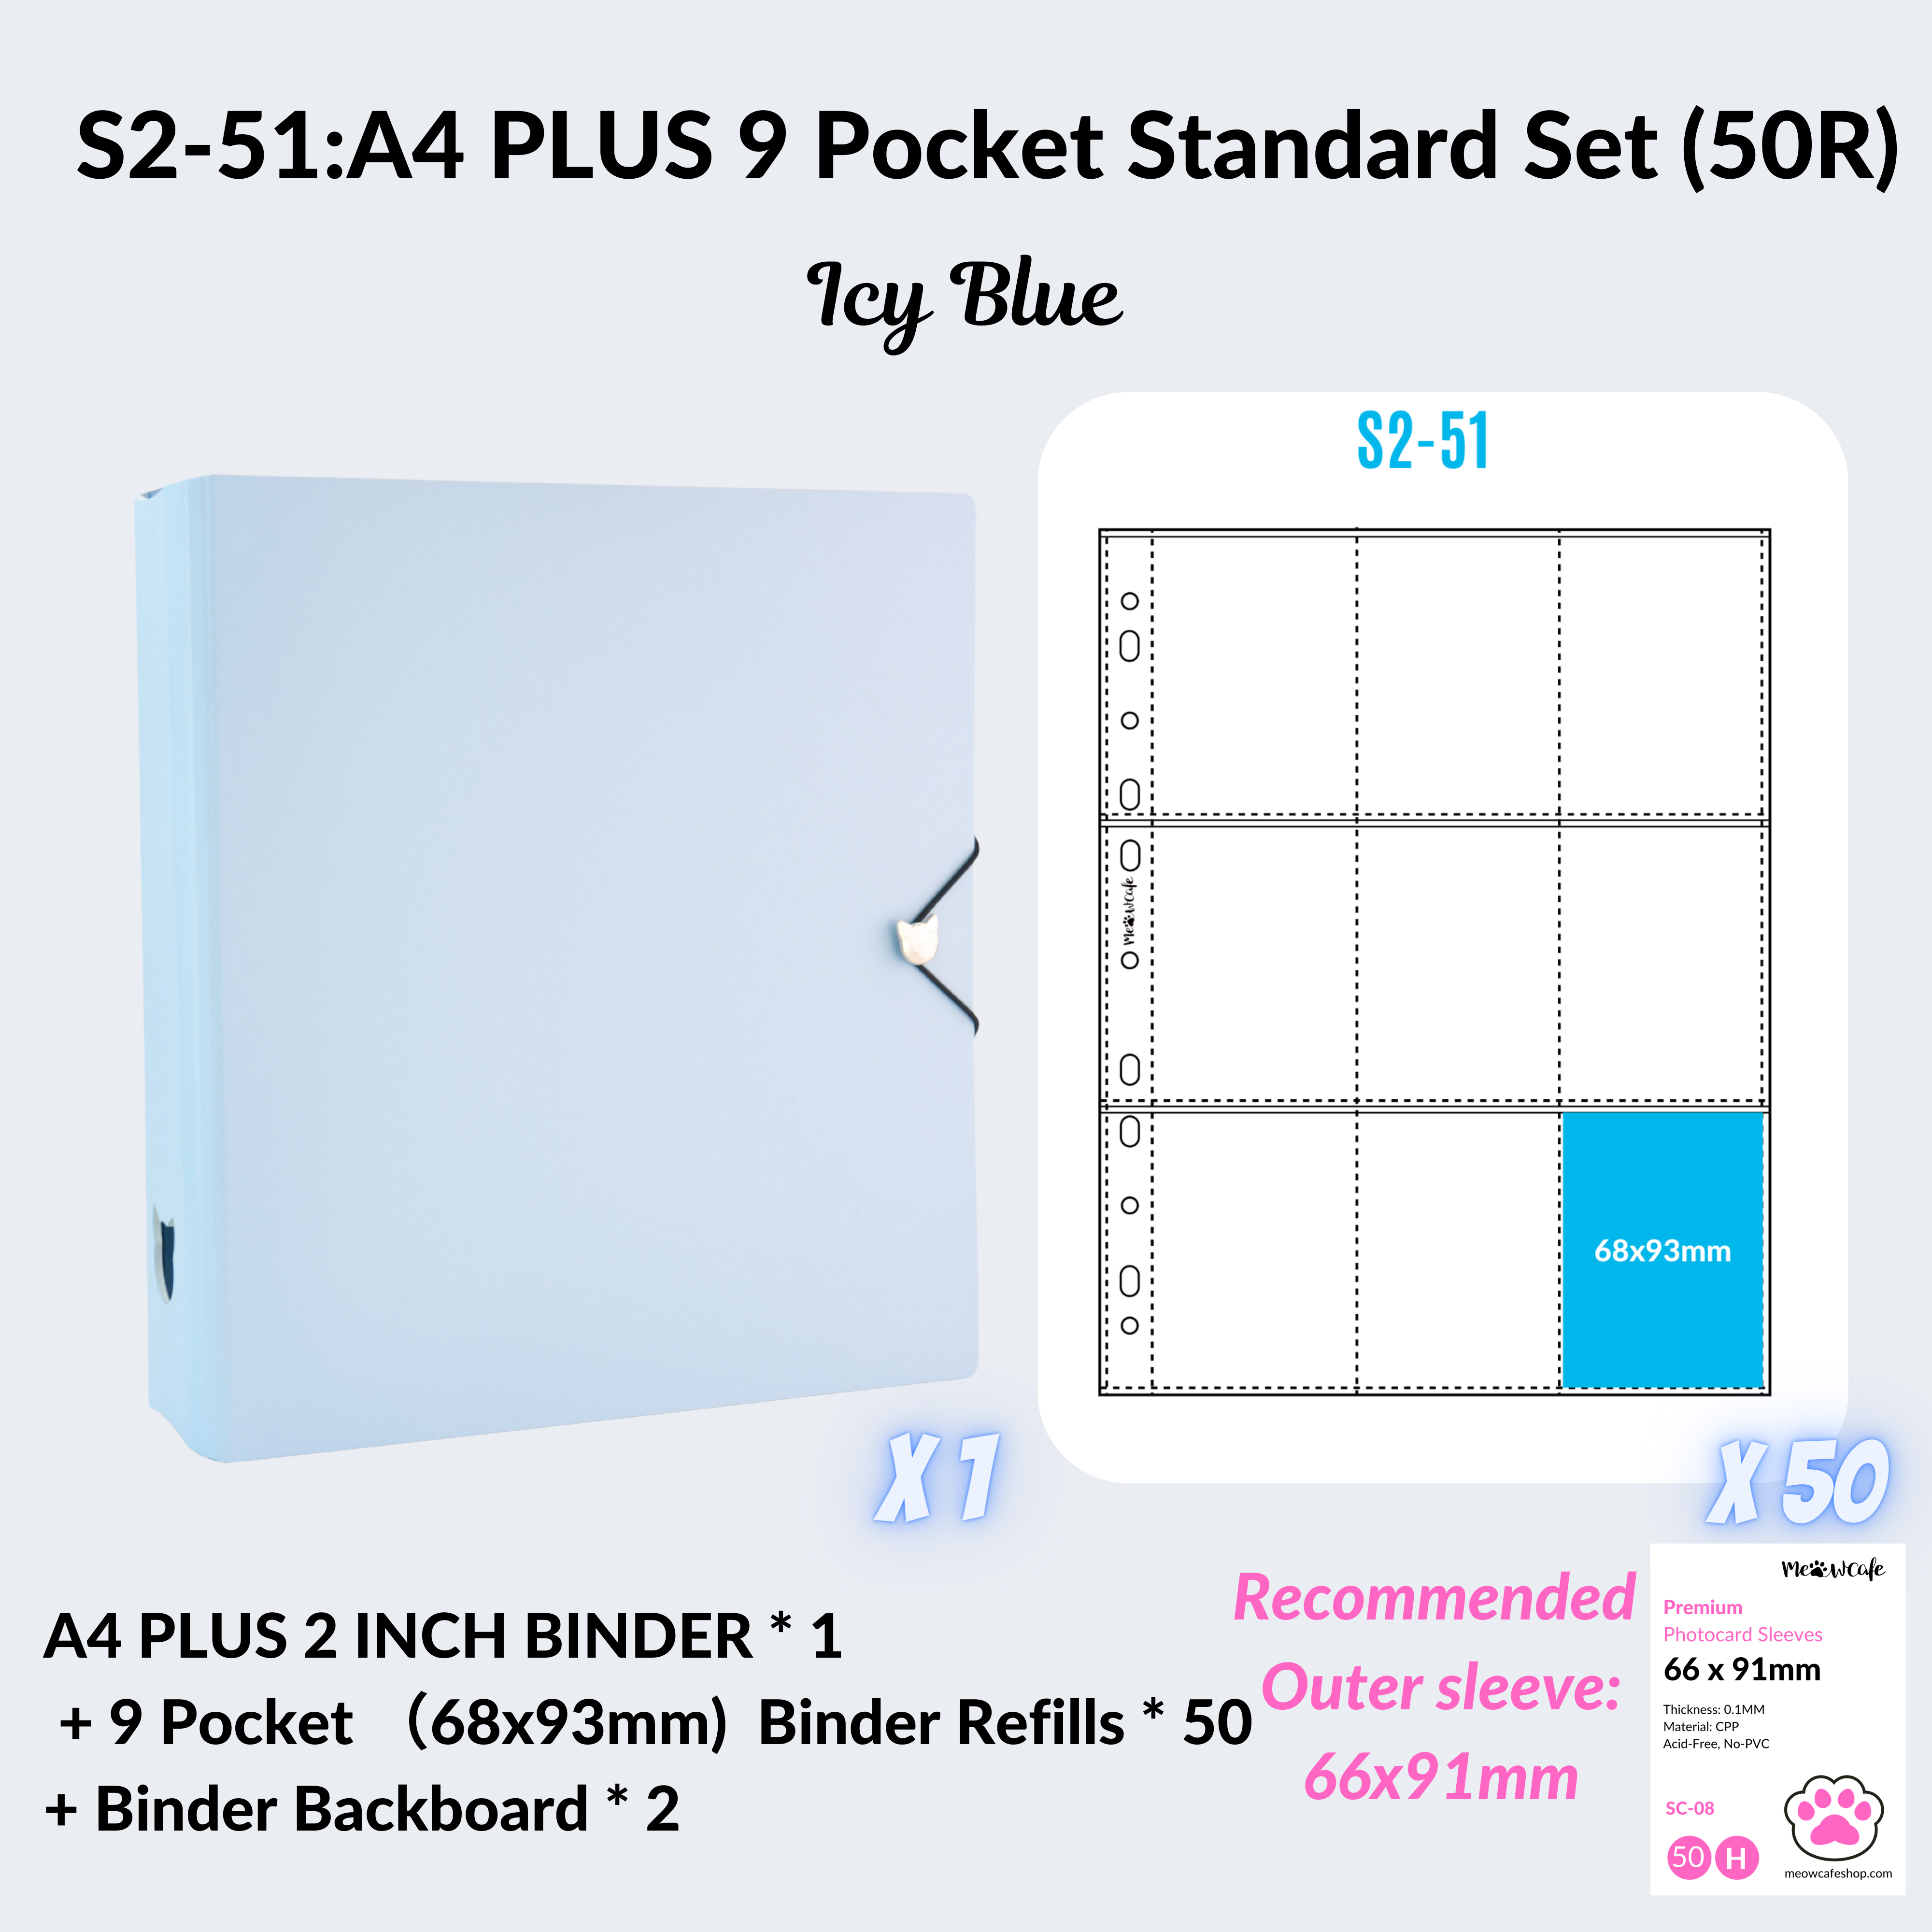 K-KEEP [A4 PLUS]  Binder - [2 inch] - [Minimalist Series]  - The Most Comprehensive A4 Binder Specially Designed for Kpop Collector